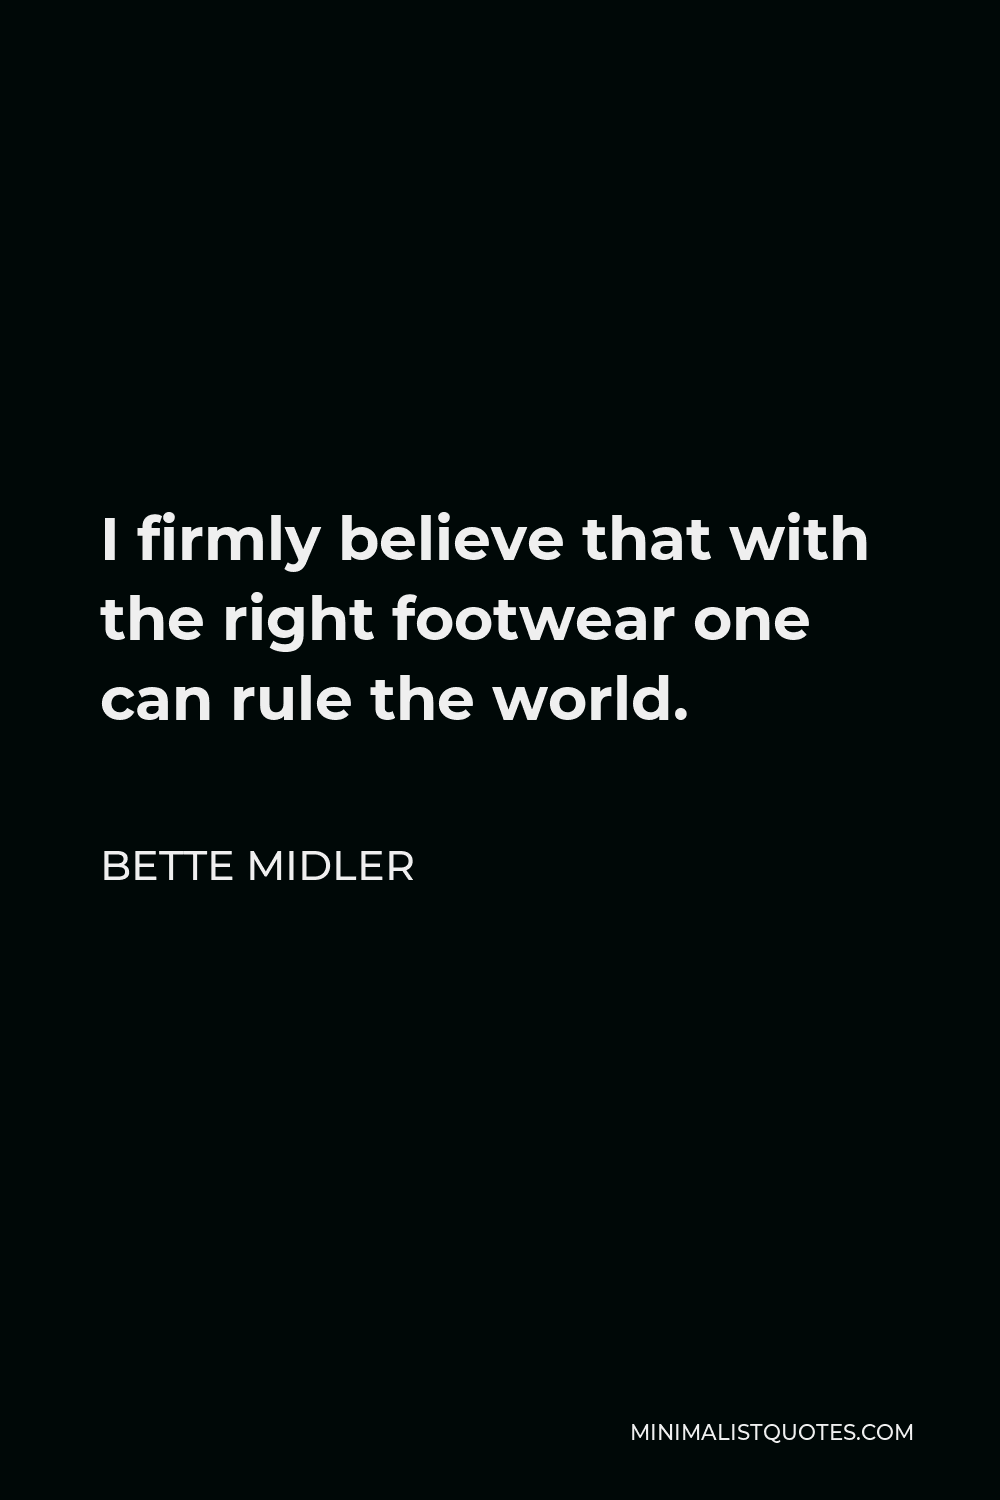 Bette Midler Quote - I firmly believe that with the right footwear one can rule the world.